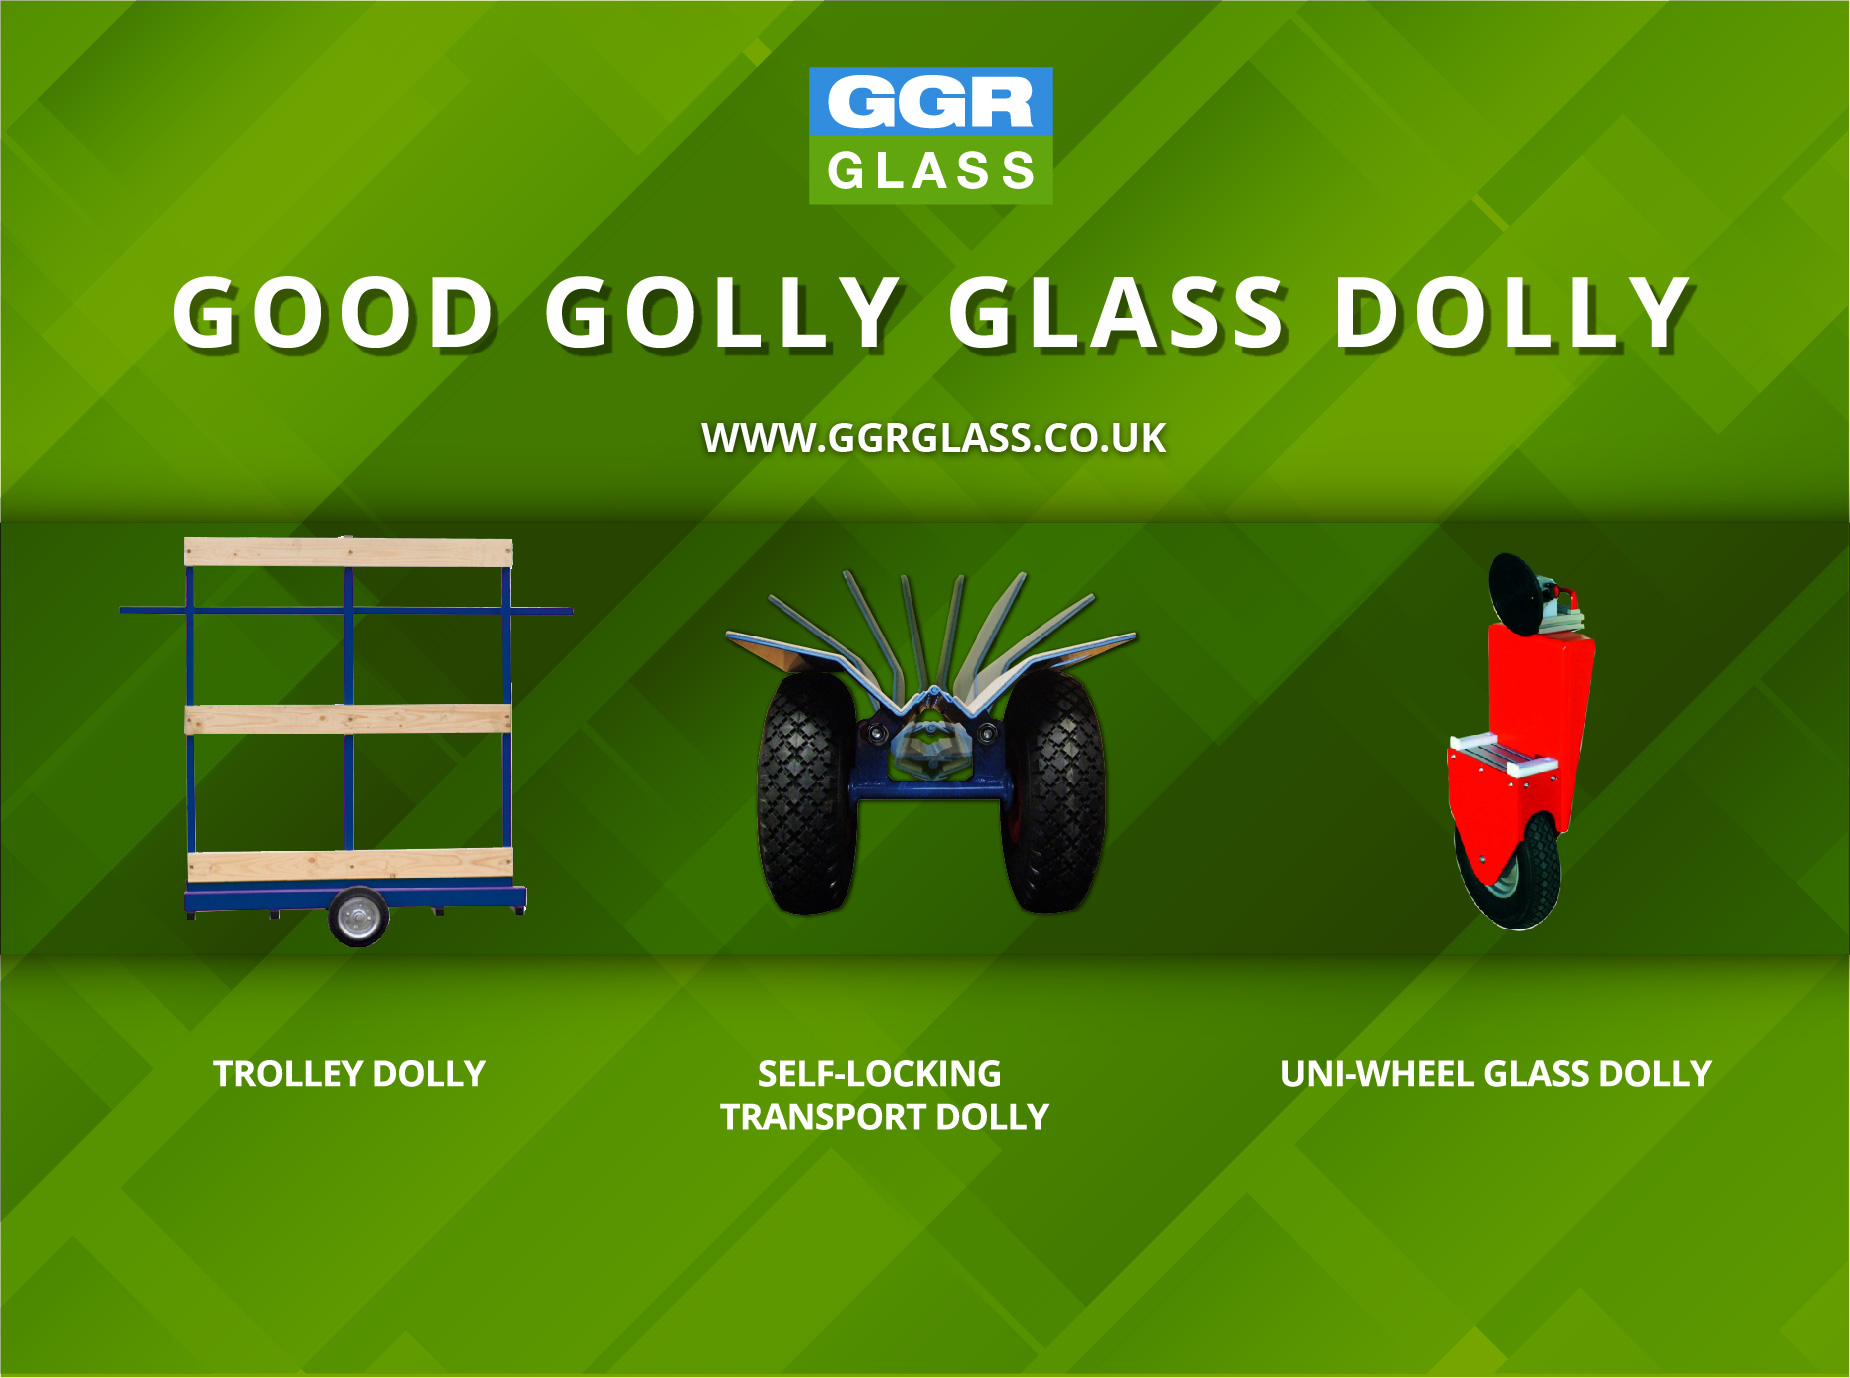 Good Golly Glass Dolly